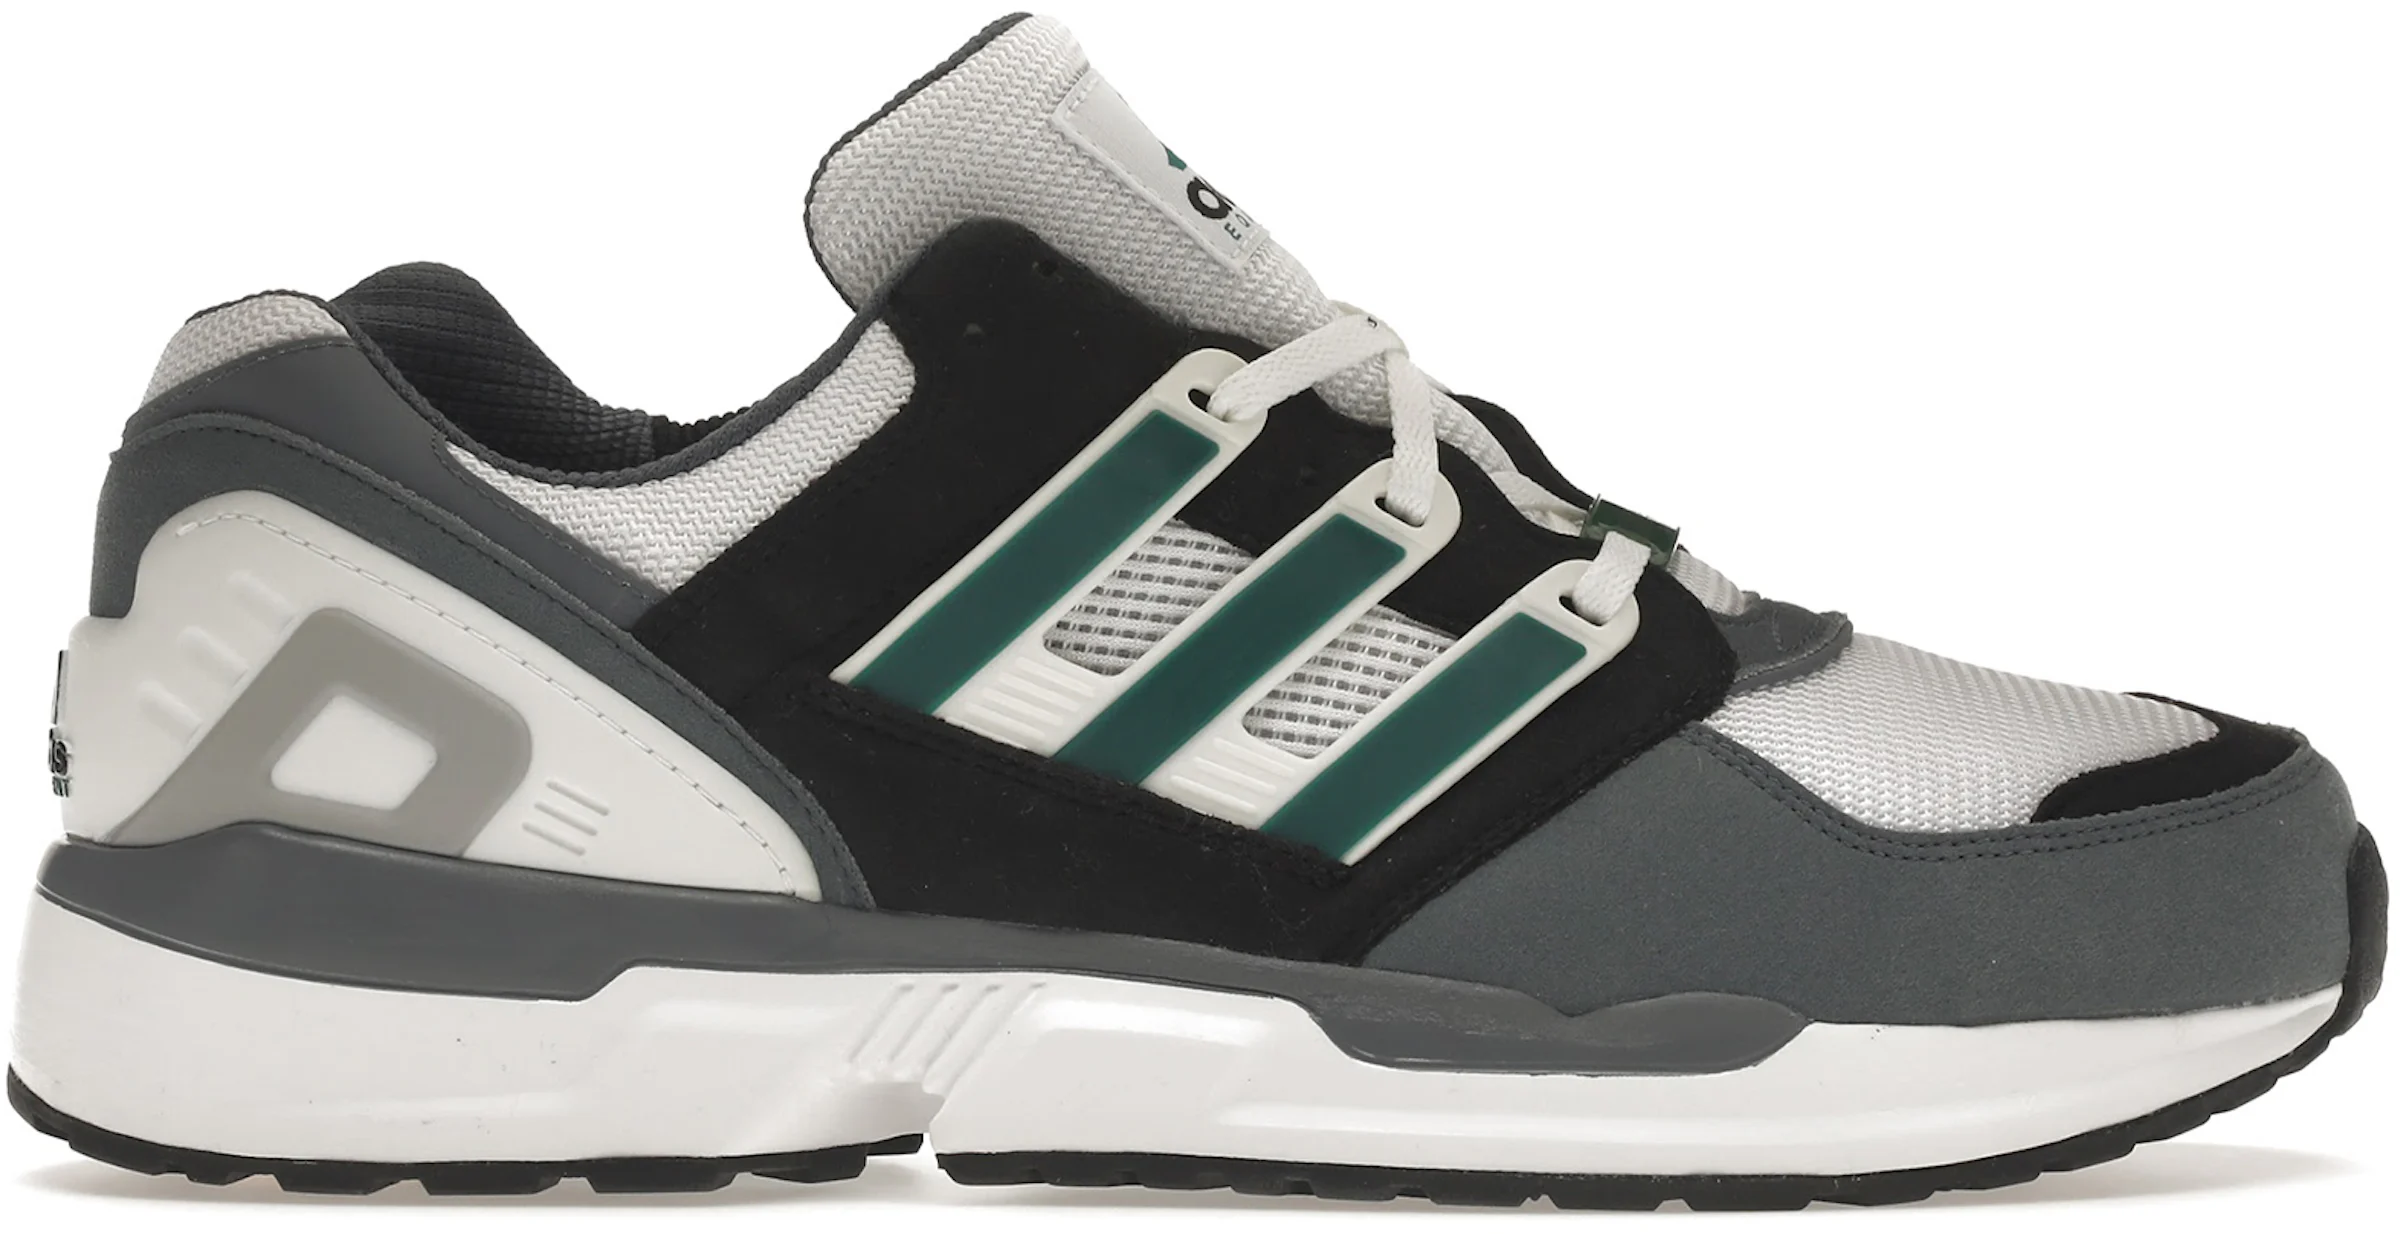 adidas EQT Running Support White Green Lead Men's - G44421 - US